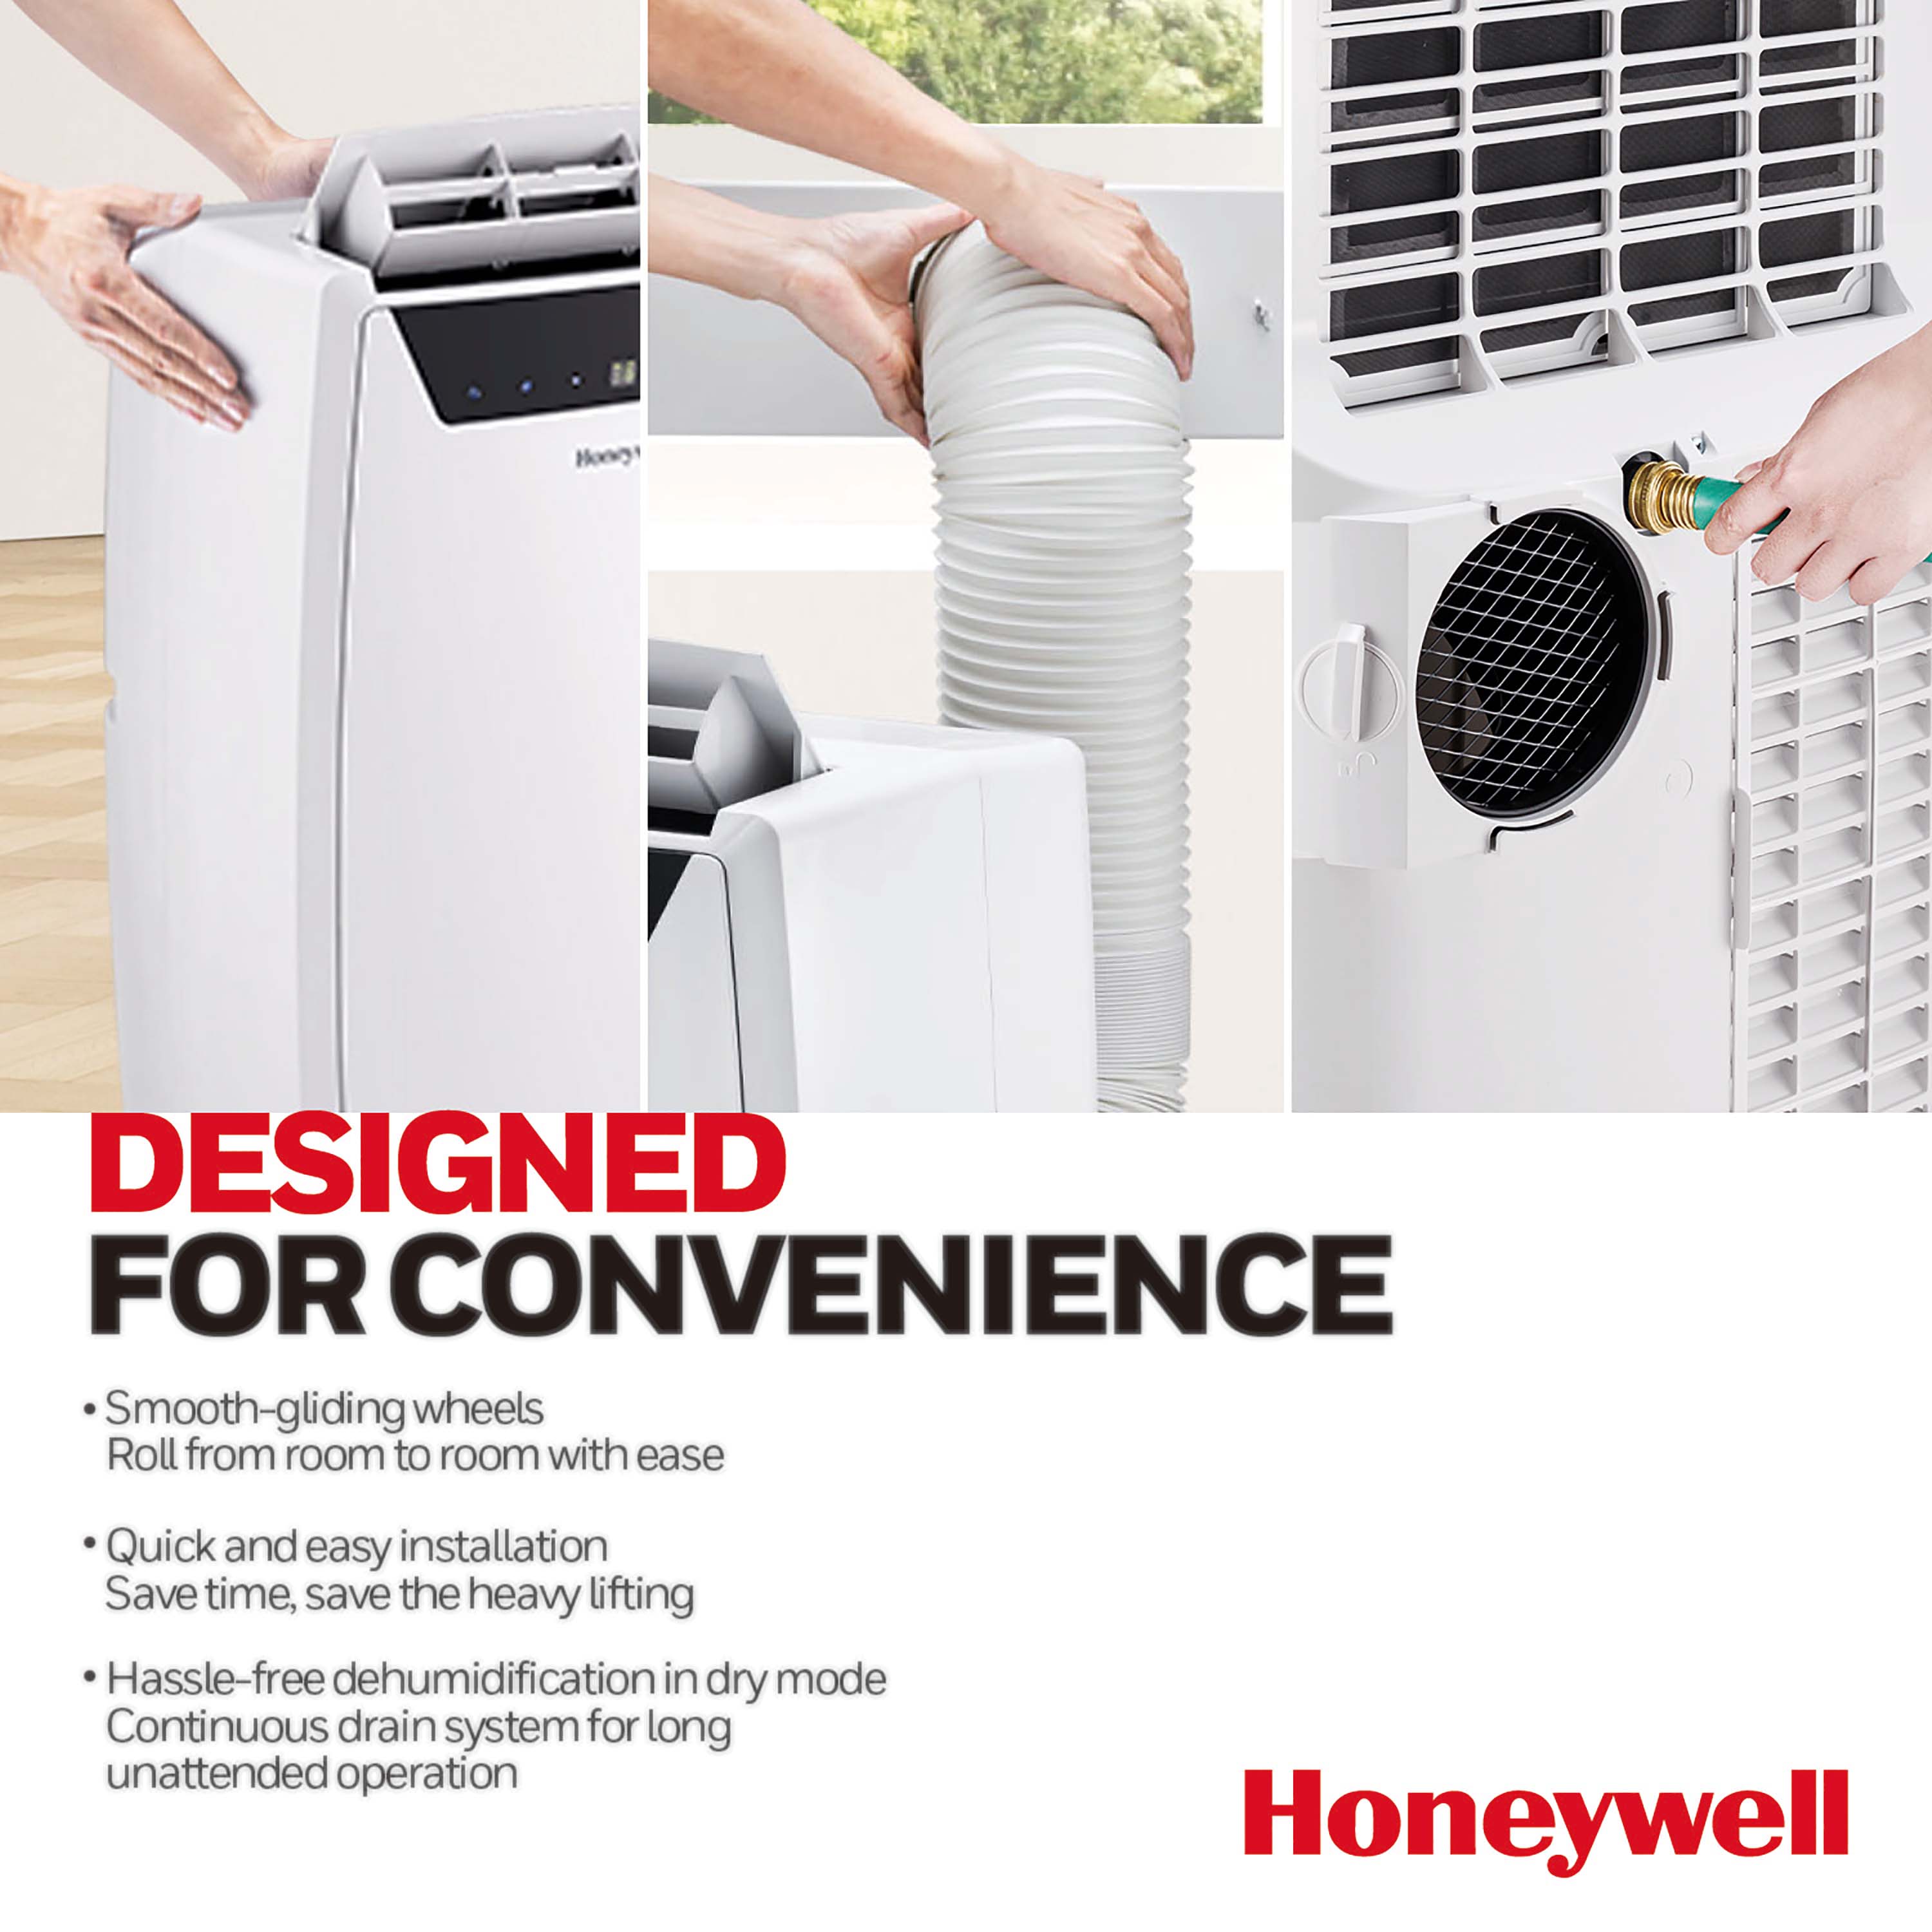 Honeywell Classic Portable Air Conditioner with Dehumidifier & Fan, Cools Rooms Up to 700 Sq. Ft. with Drain Pan & Insulation Tape, MN4CFSWW0 (White) - image 5 of 10